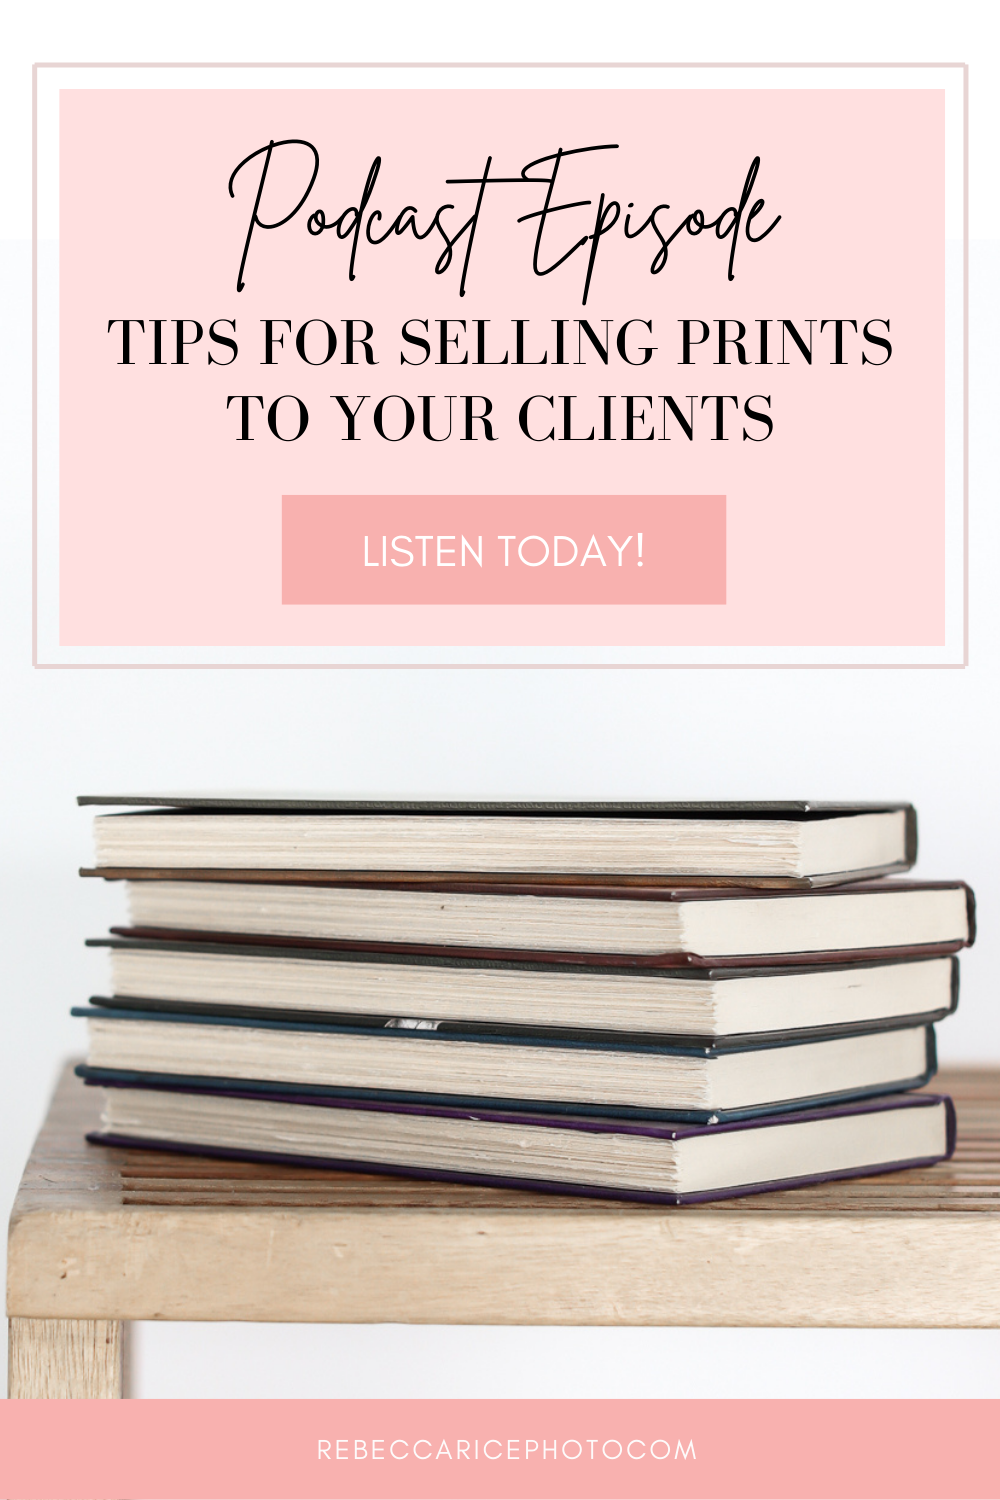 Tips for Selling Prints To Your Clients